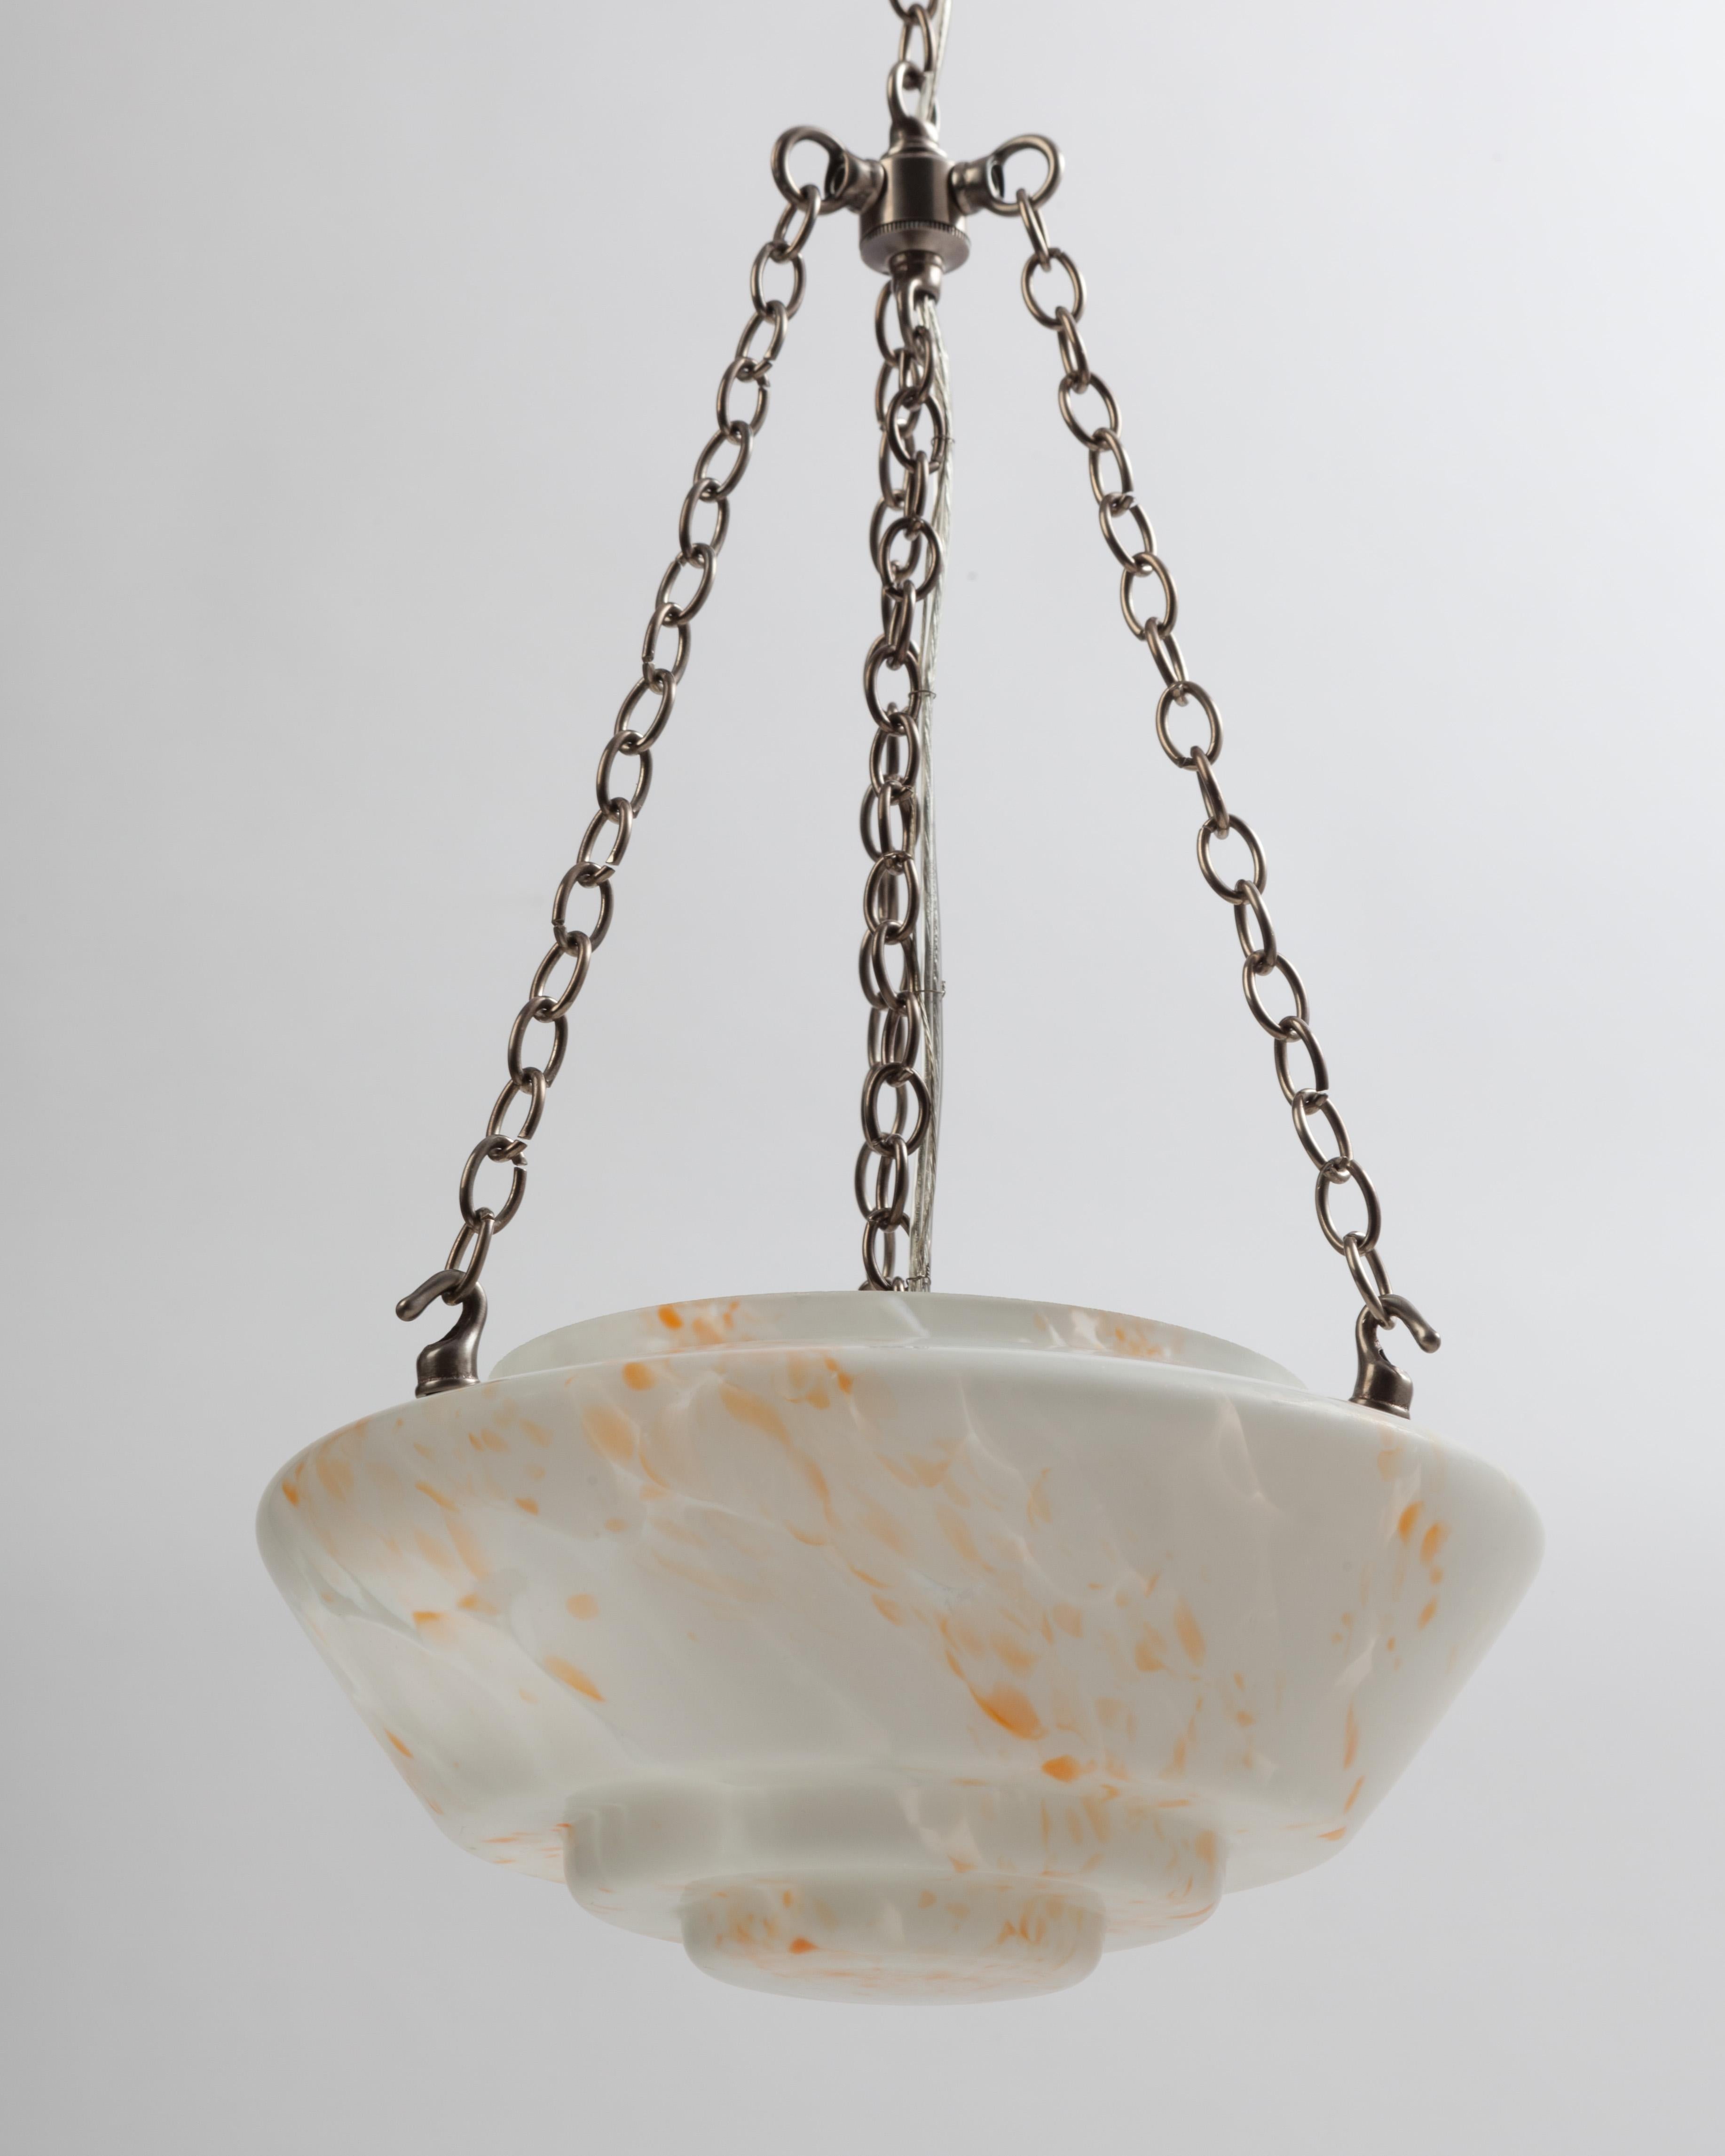 Plated Mid-Century Modern End-Of-Day Art Glass and Nickel Pendant Light, Circa 1950s For Sale